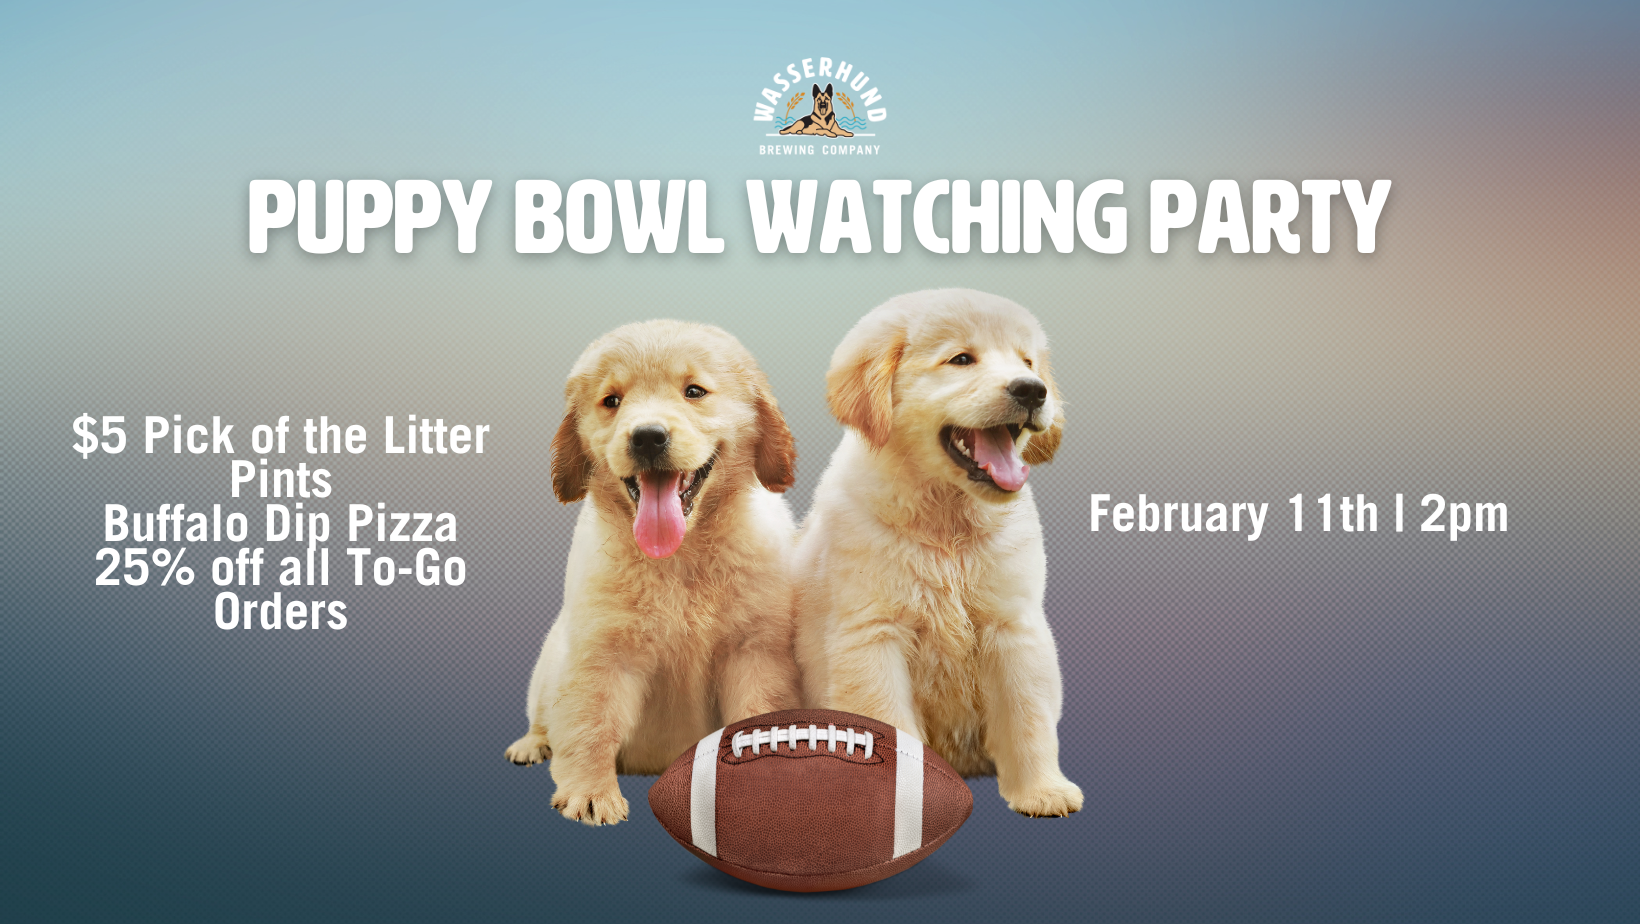 Puppy bowl watching party